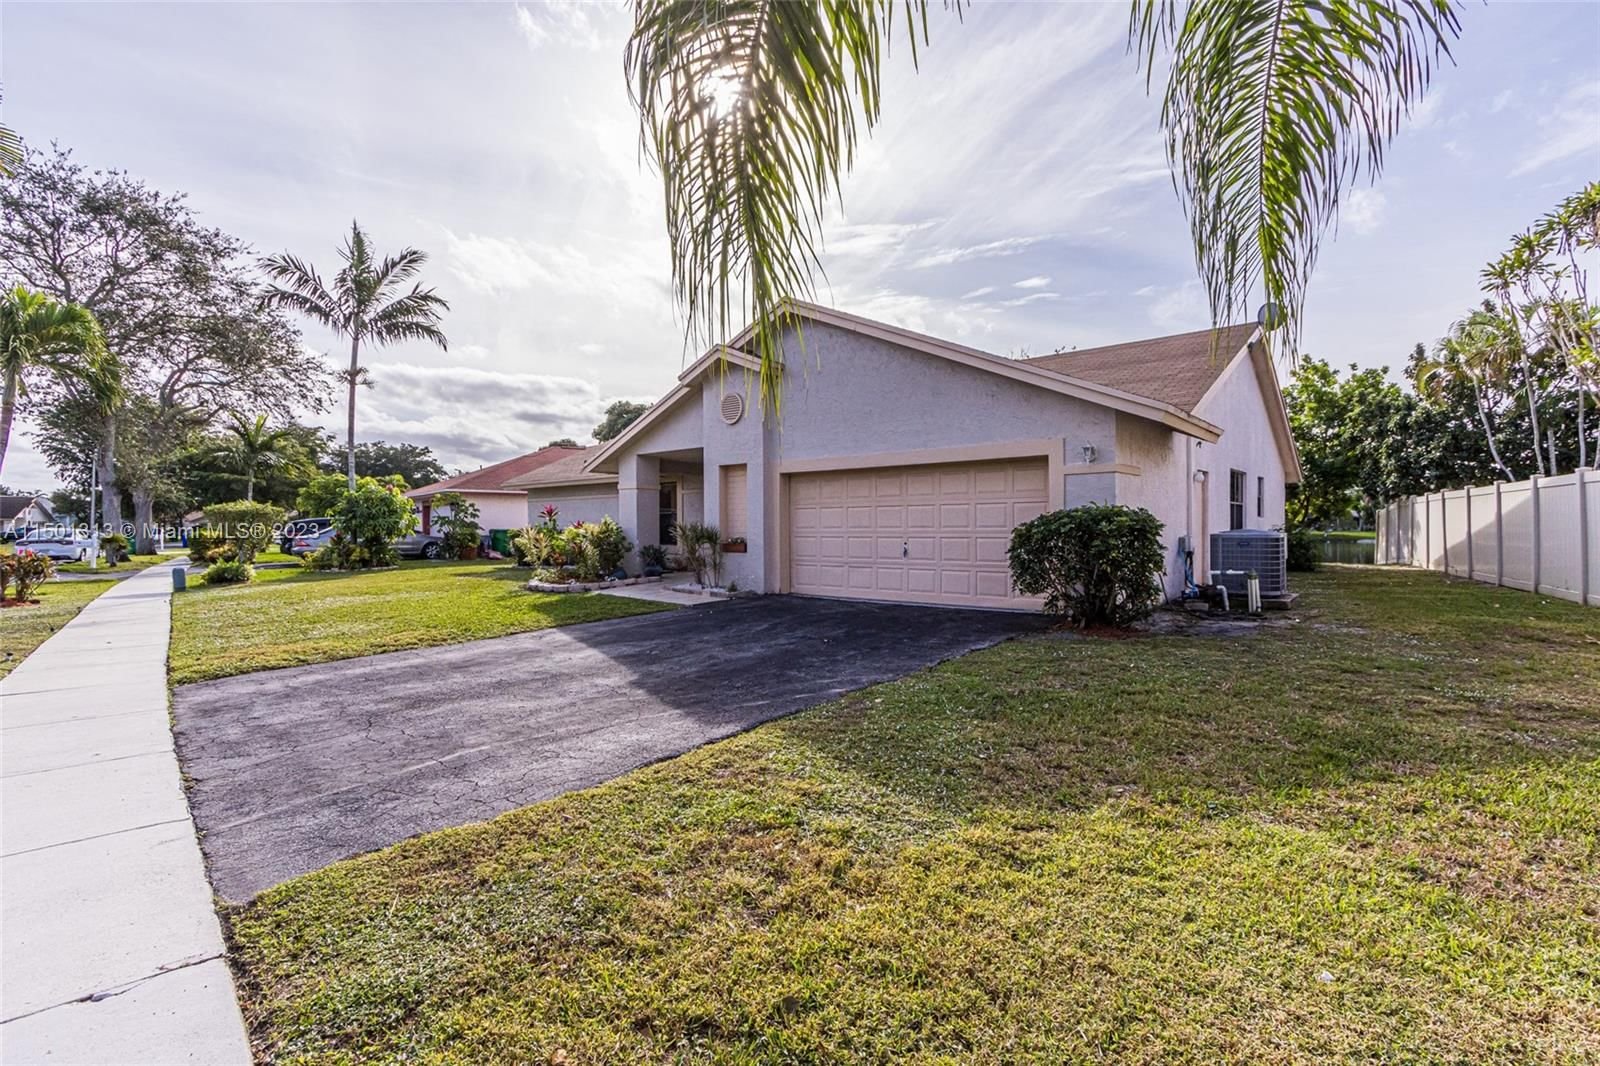 Real estate property located at 9760 Forest Dr, Broward County, BRIARGATE PLAT, Miramar, FL